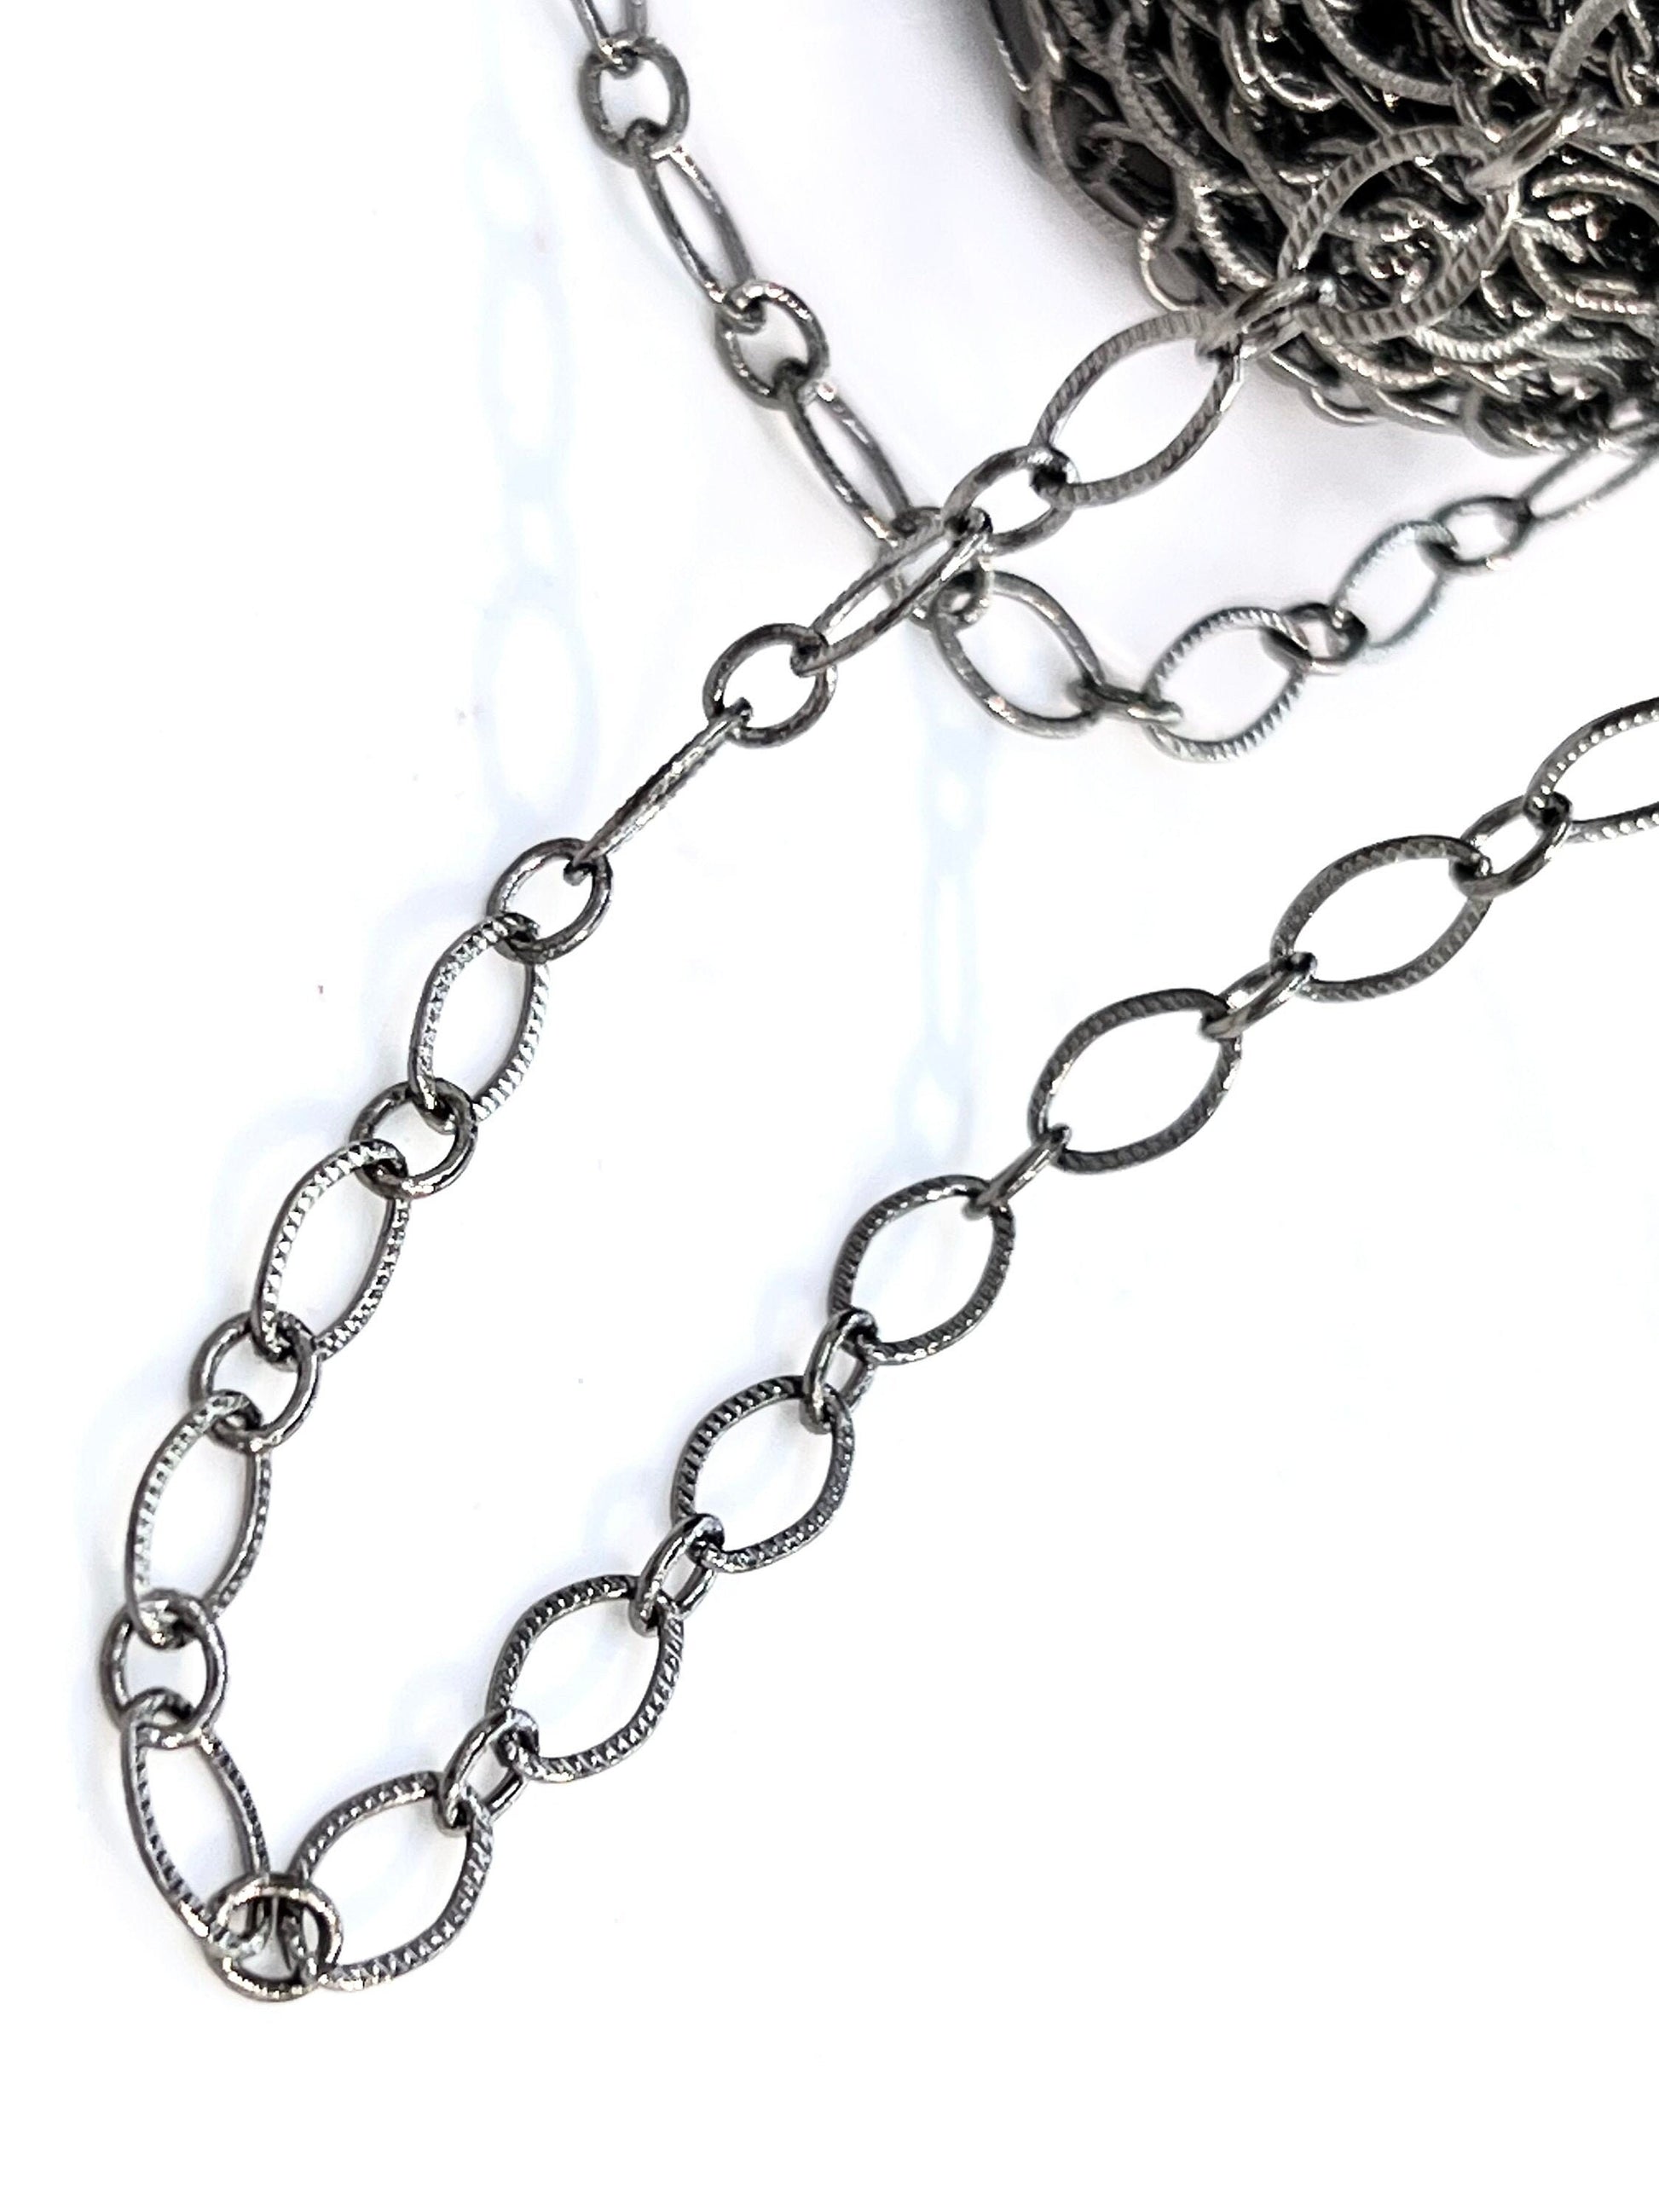 3 feet gunmetal black chain for jewelry making supplies, oval link texture chain,sell by 1 yard, 36&quot;